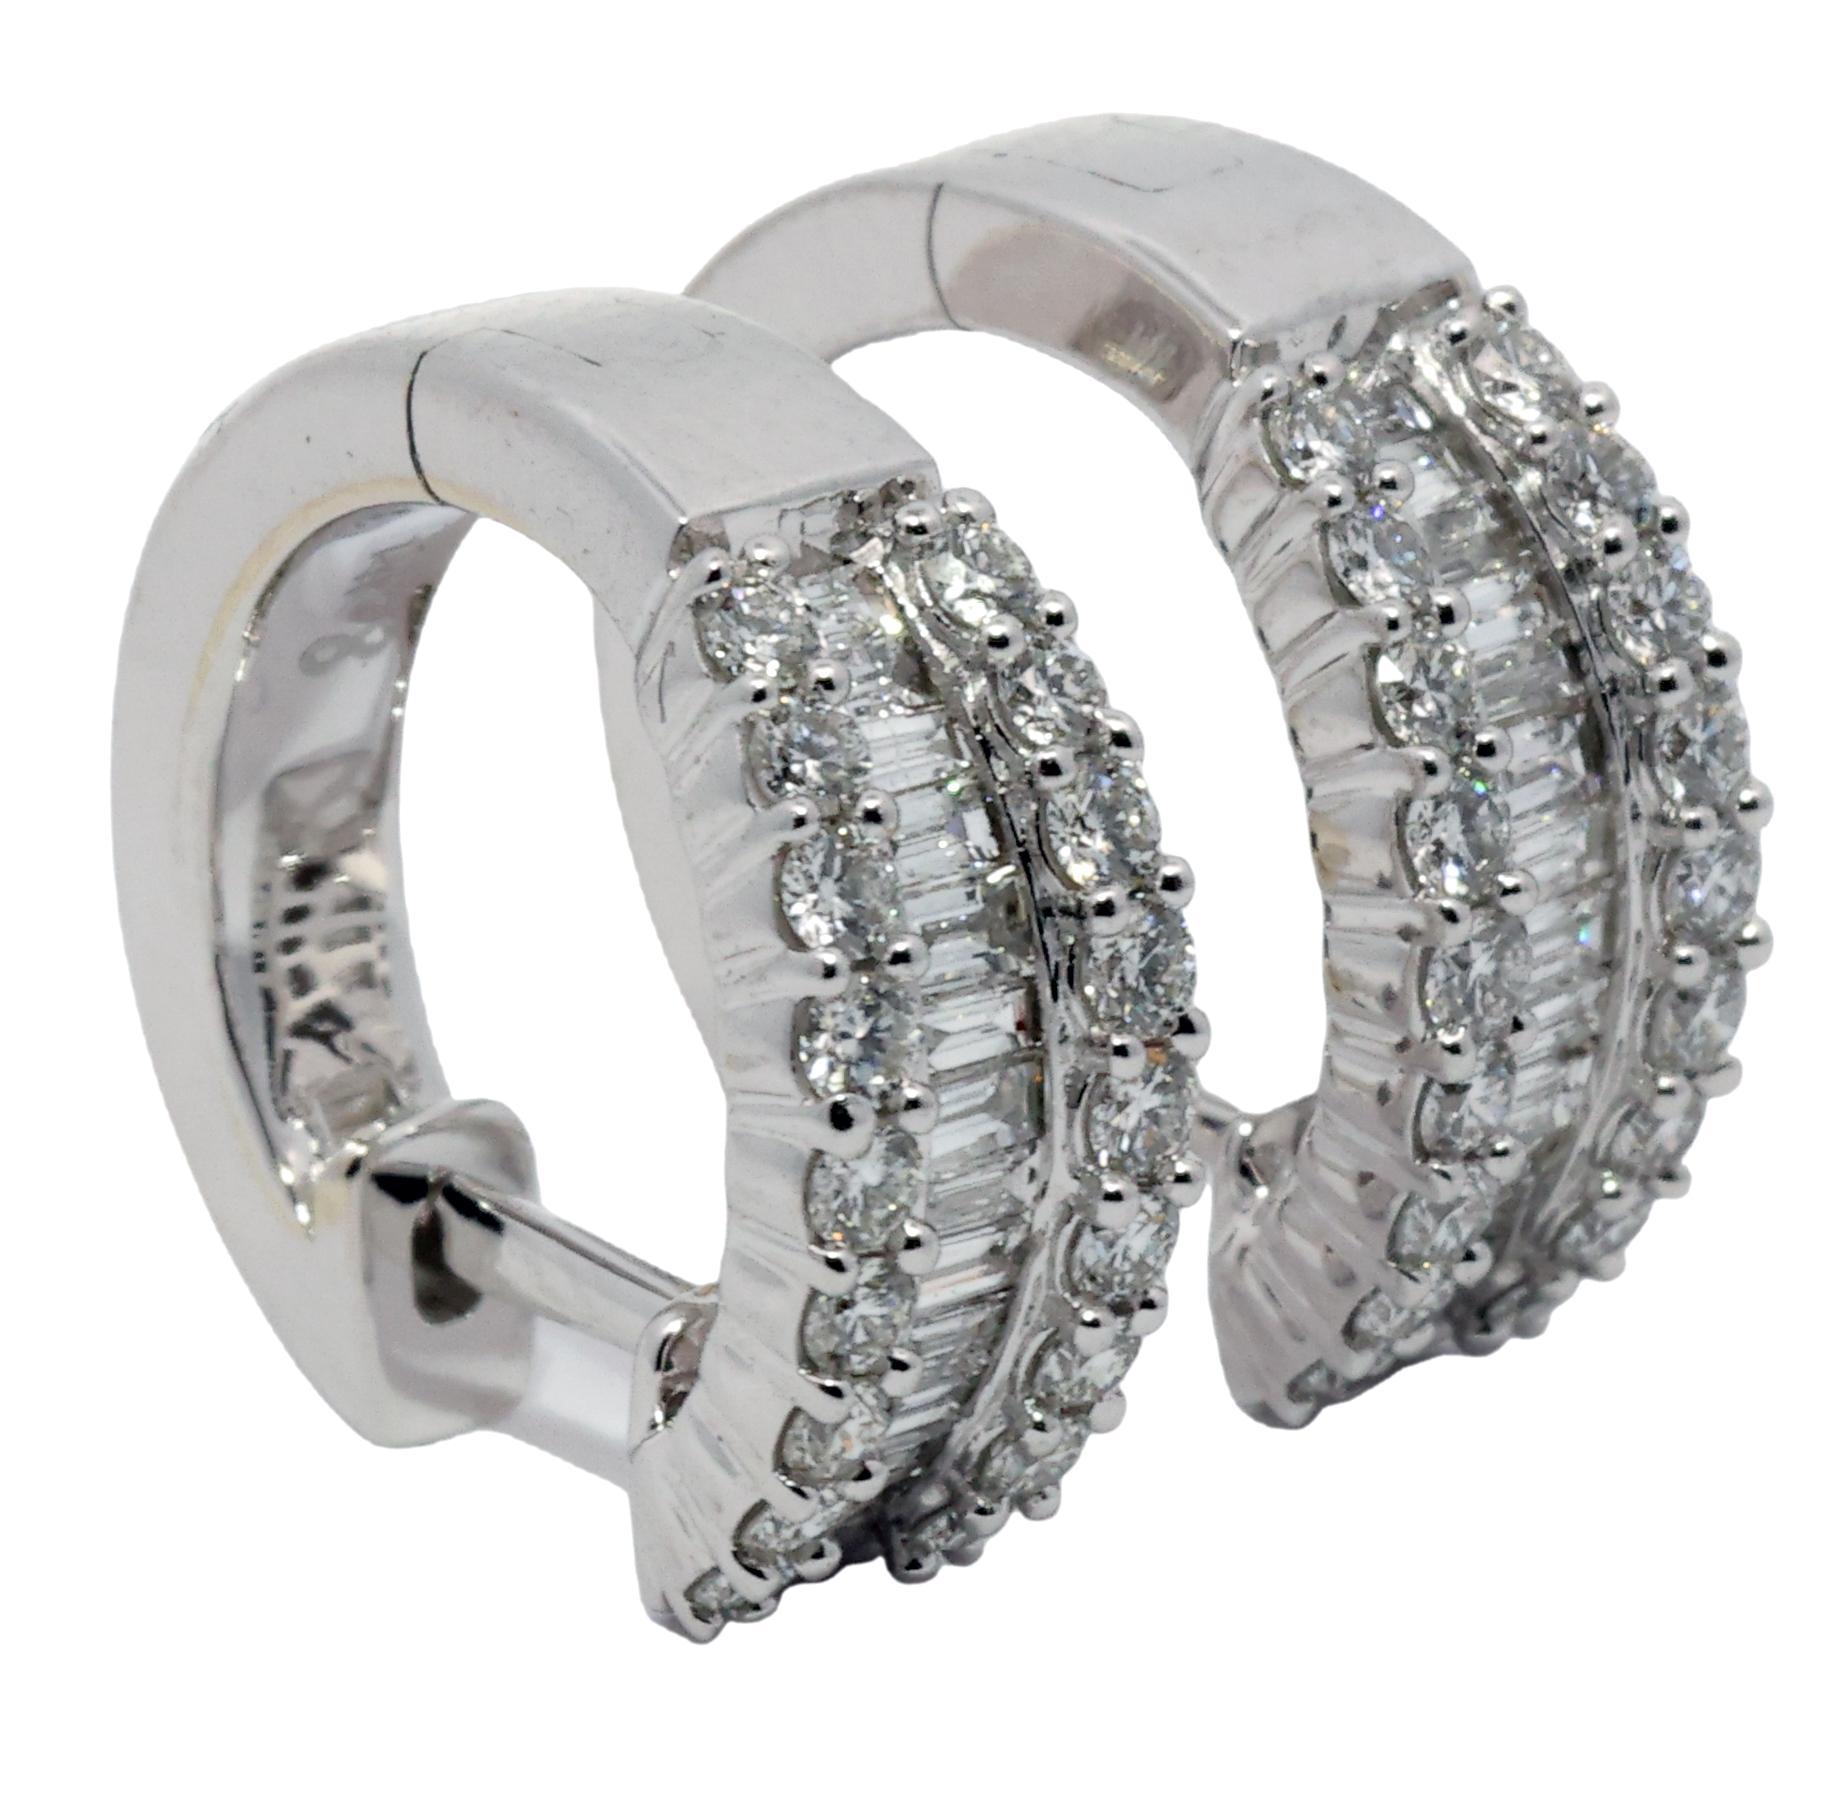 Introducing a timeless embodiment of elegance- our mini 3 row diamond huggie hoop earrings in white gold. These exquisite earrings redefine sophistication, offering a delicate yet dazzling accessory that seamlessly blends classic design with modern